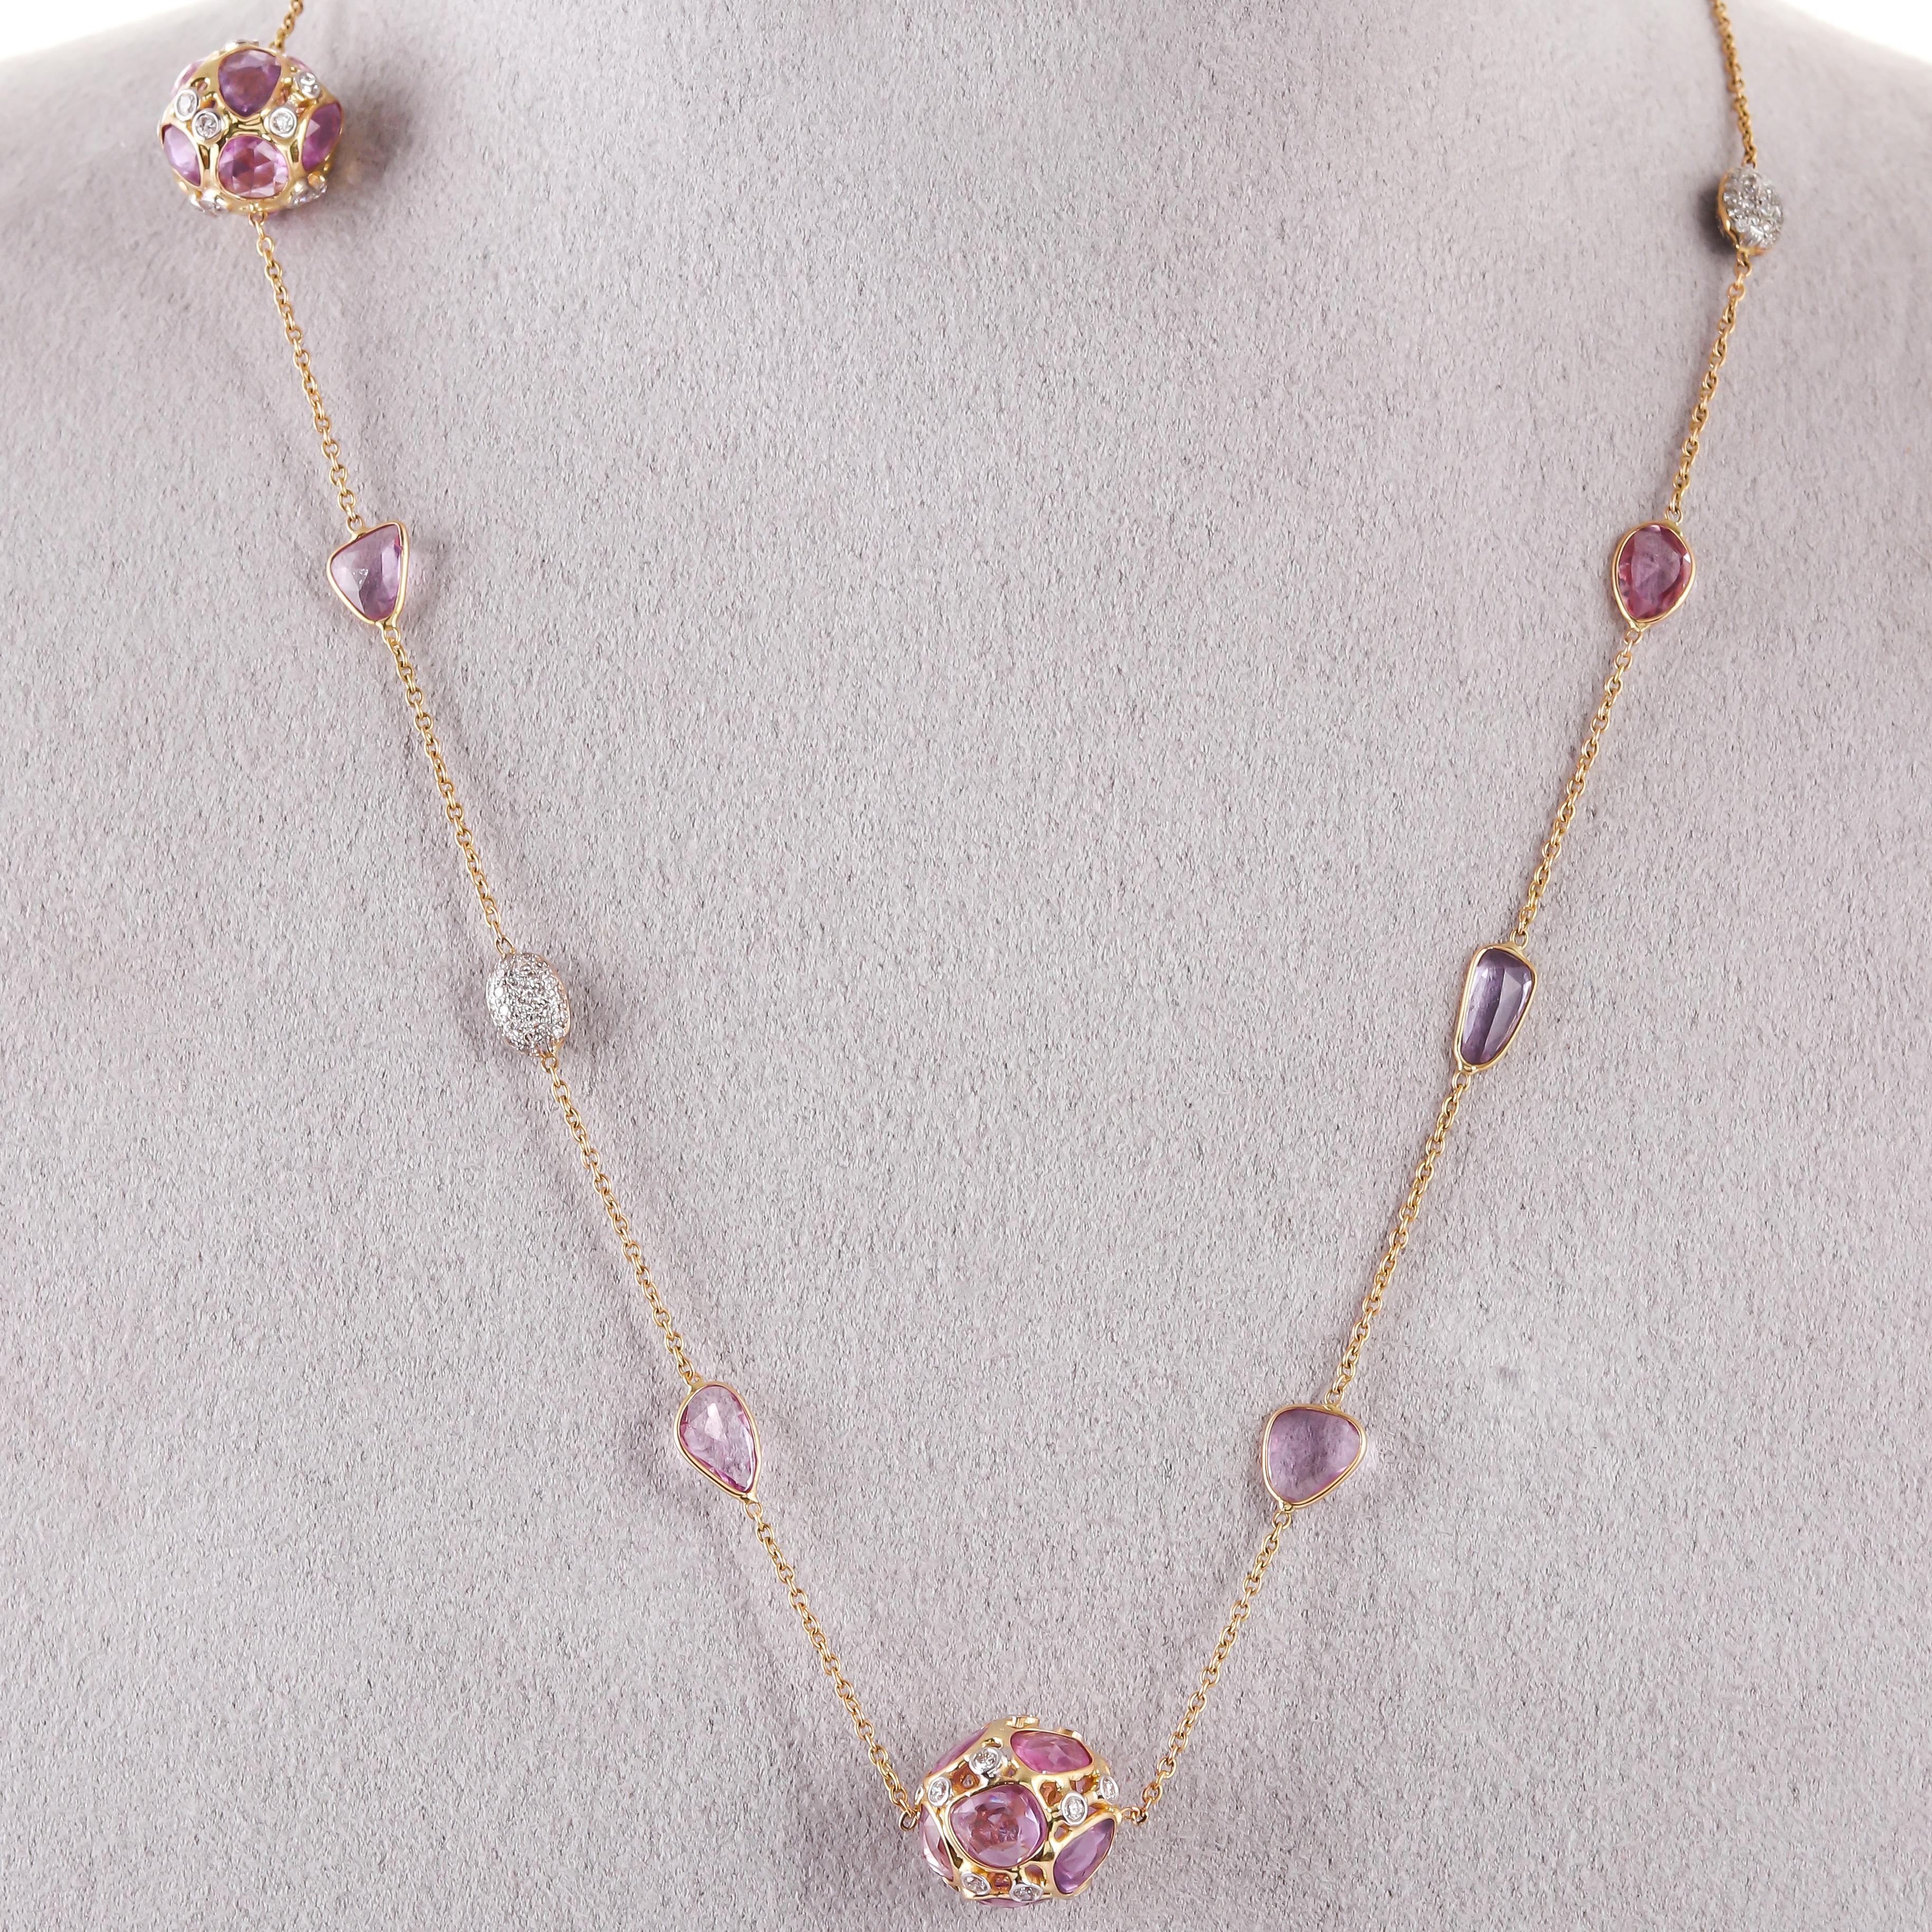 28.82 Carat Pink Sapphire Rose Cut Diamond 18 Karat Yellow Gold Chain In New Condition For Sale In Jaipur, Jaipur